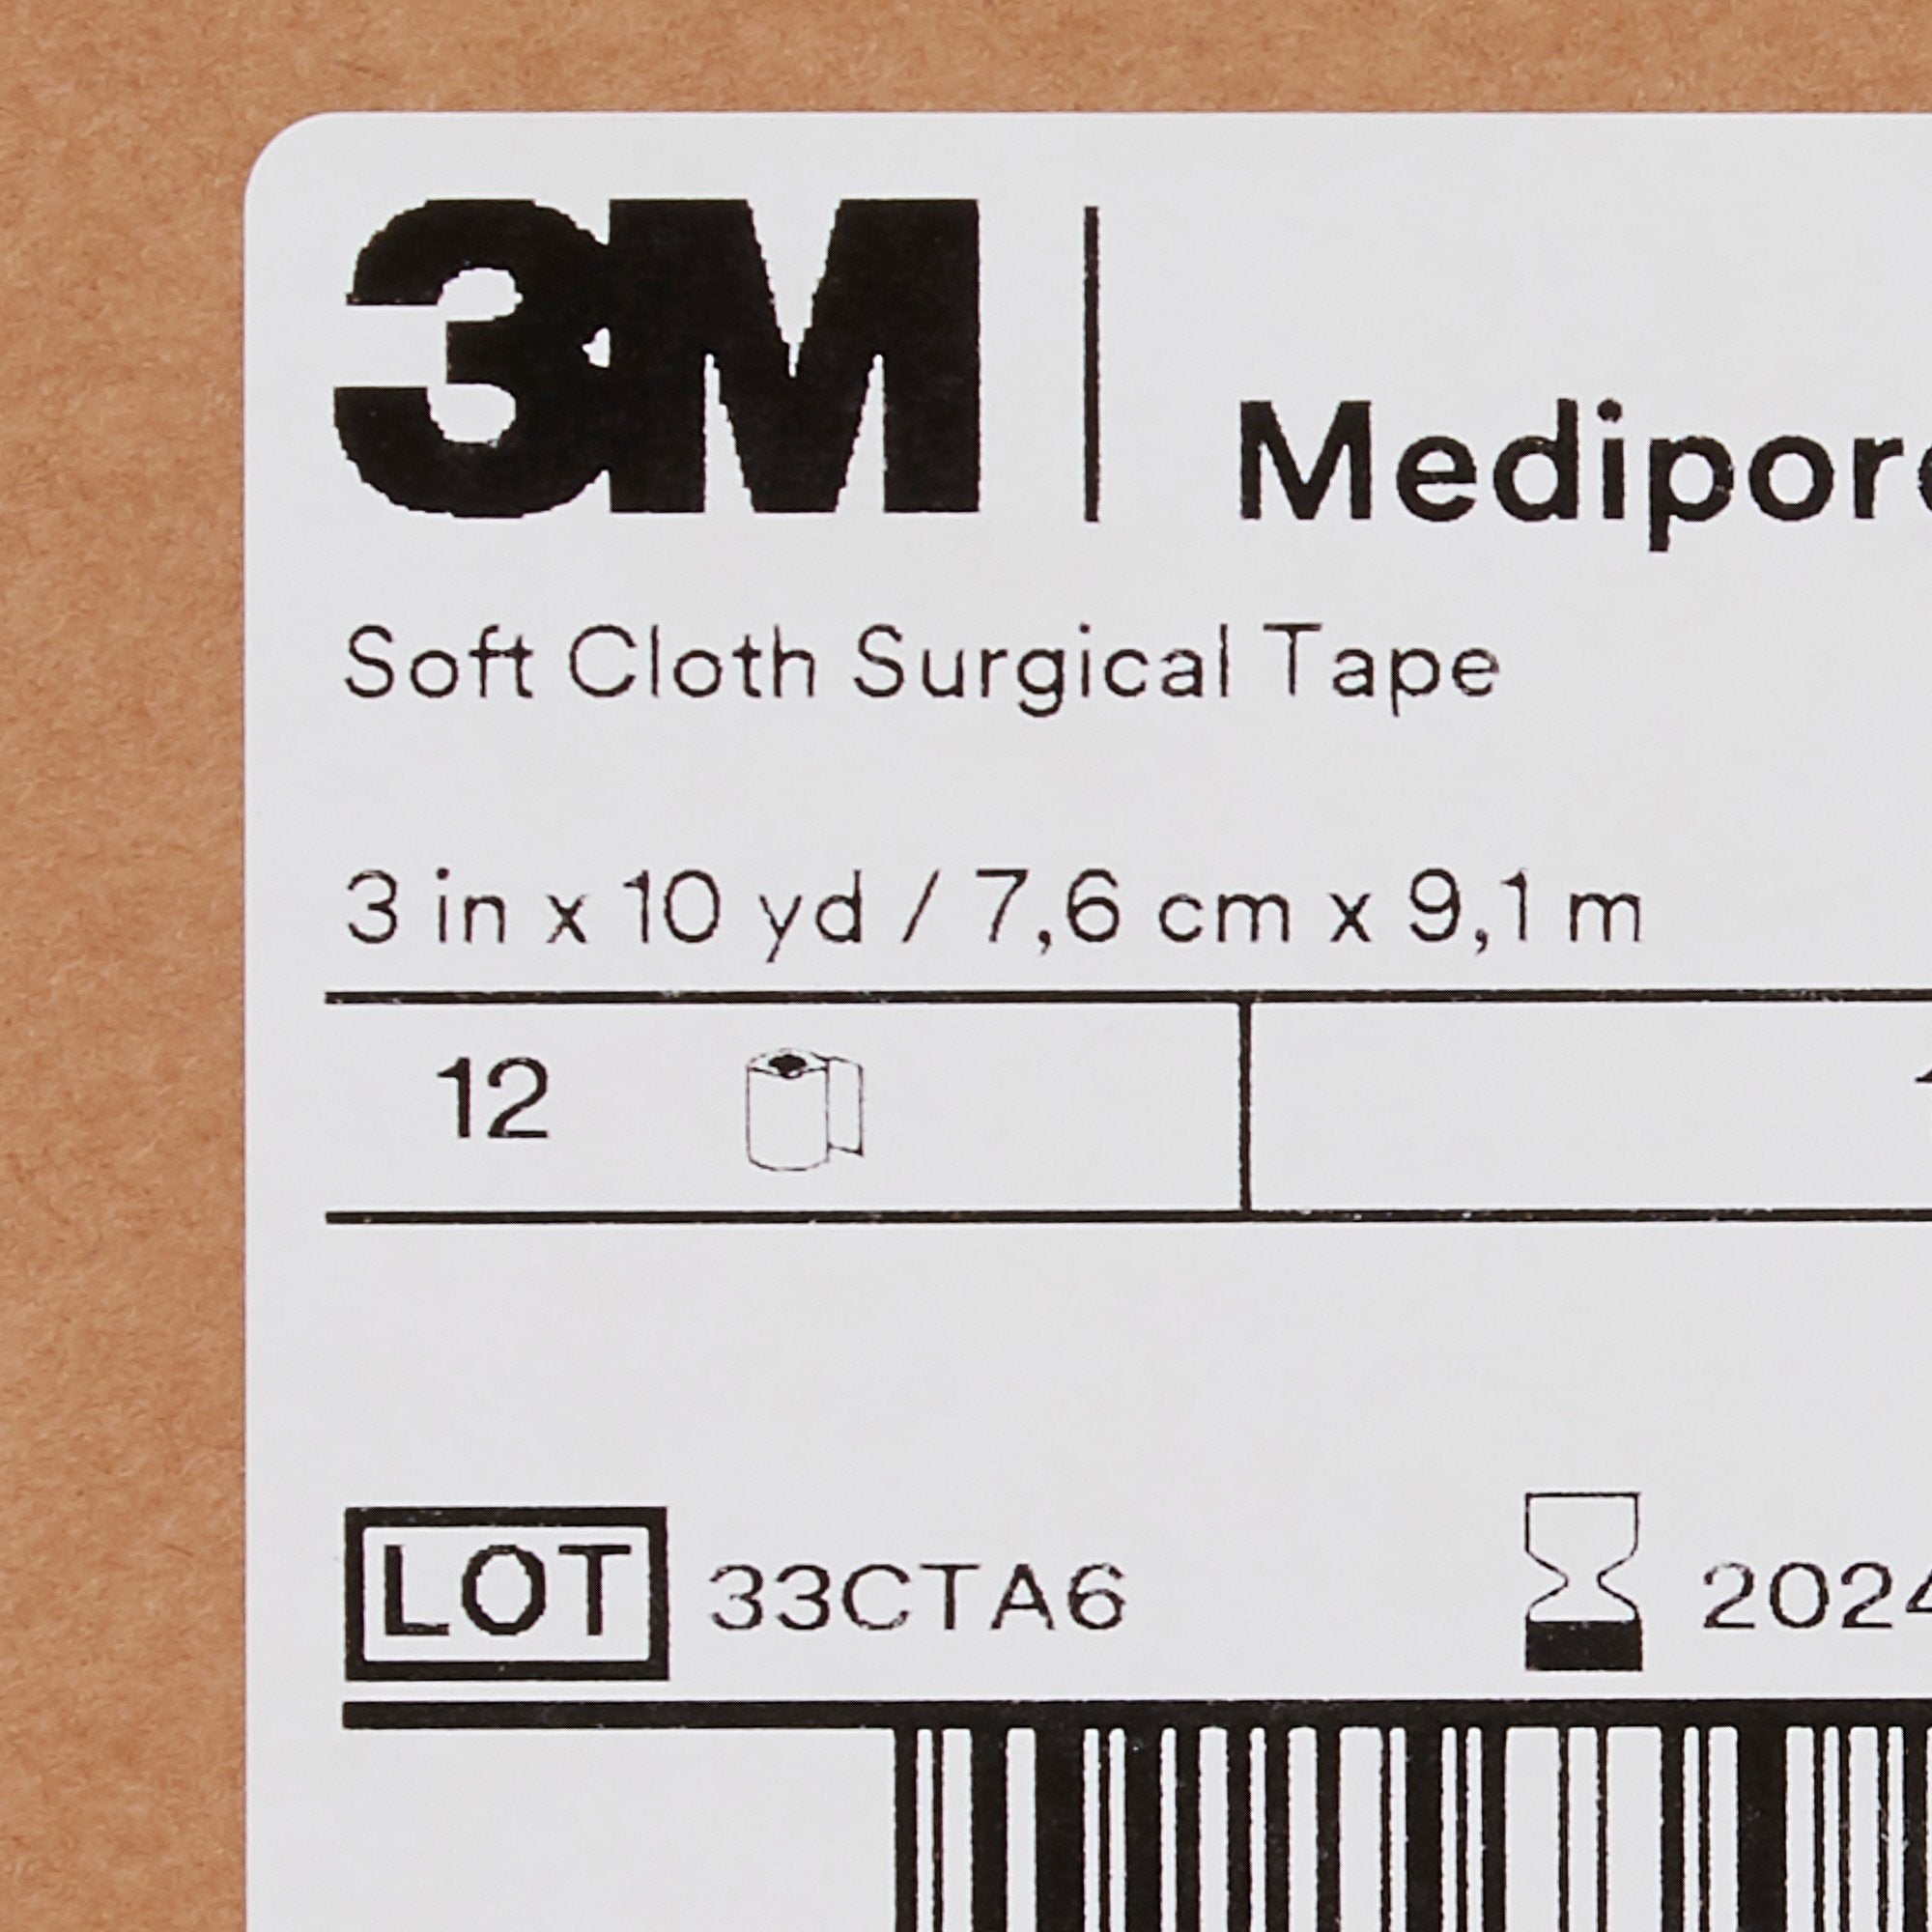 3M Medipore H Soft Cloth Surgical Tape, 6 inch x 10 yard, Case of 12 Rolls